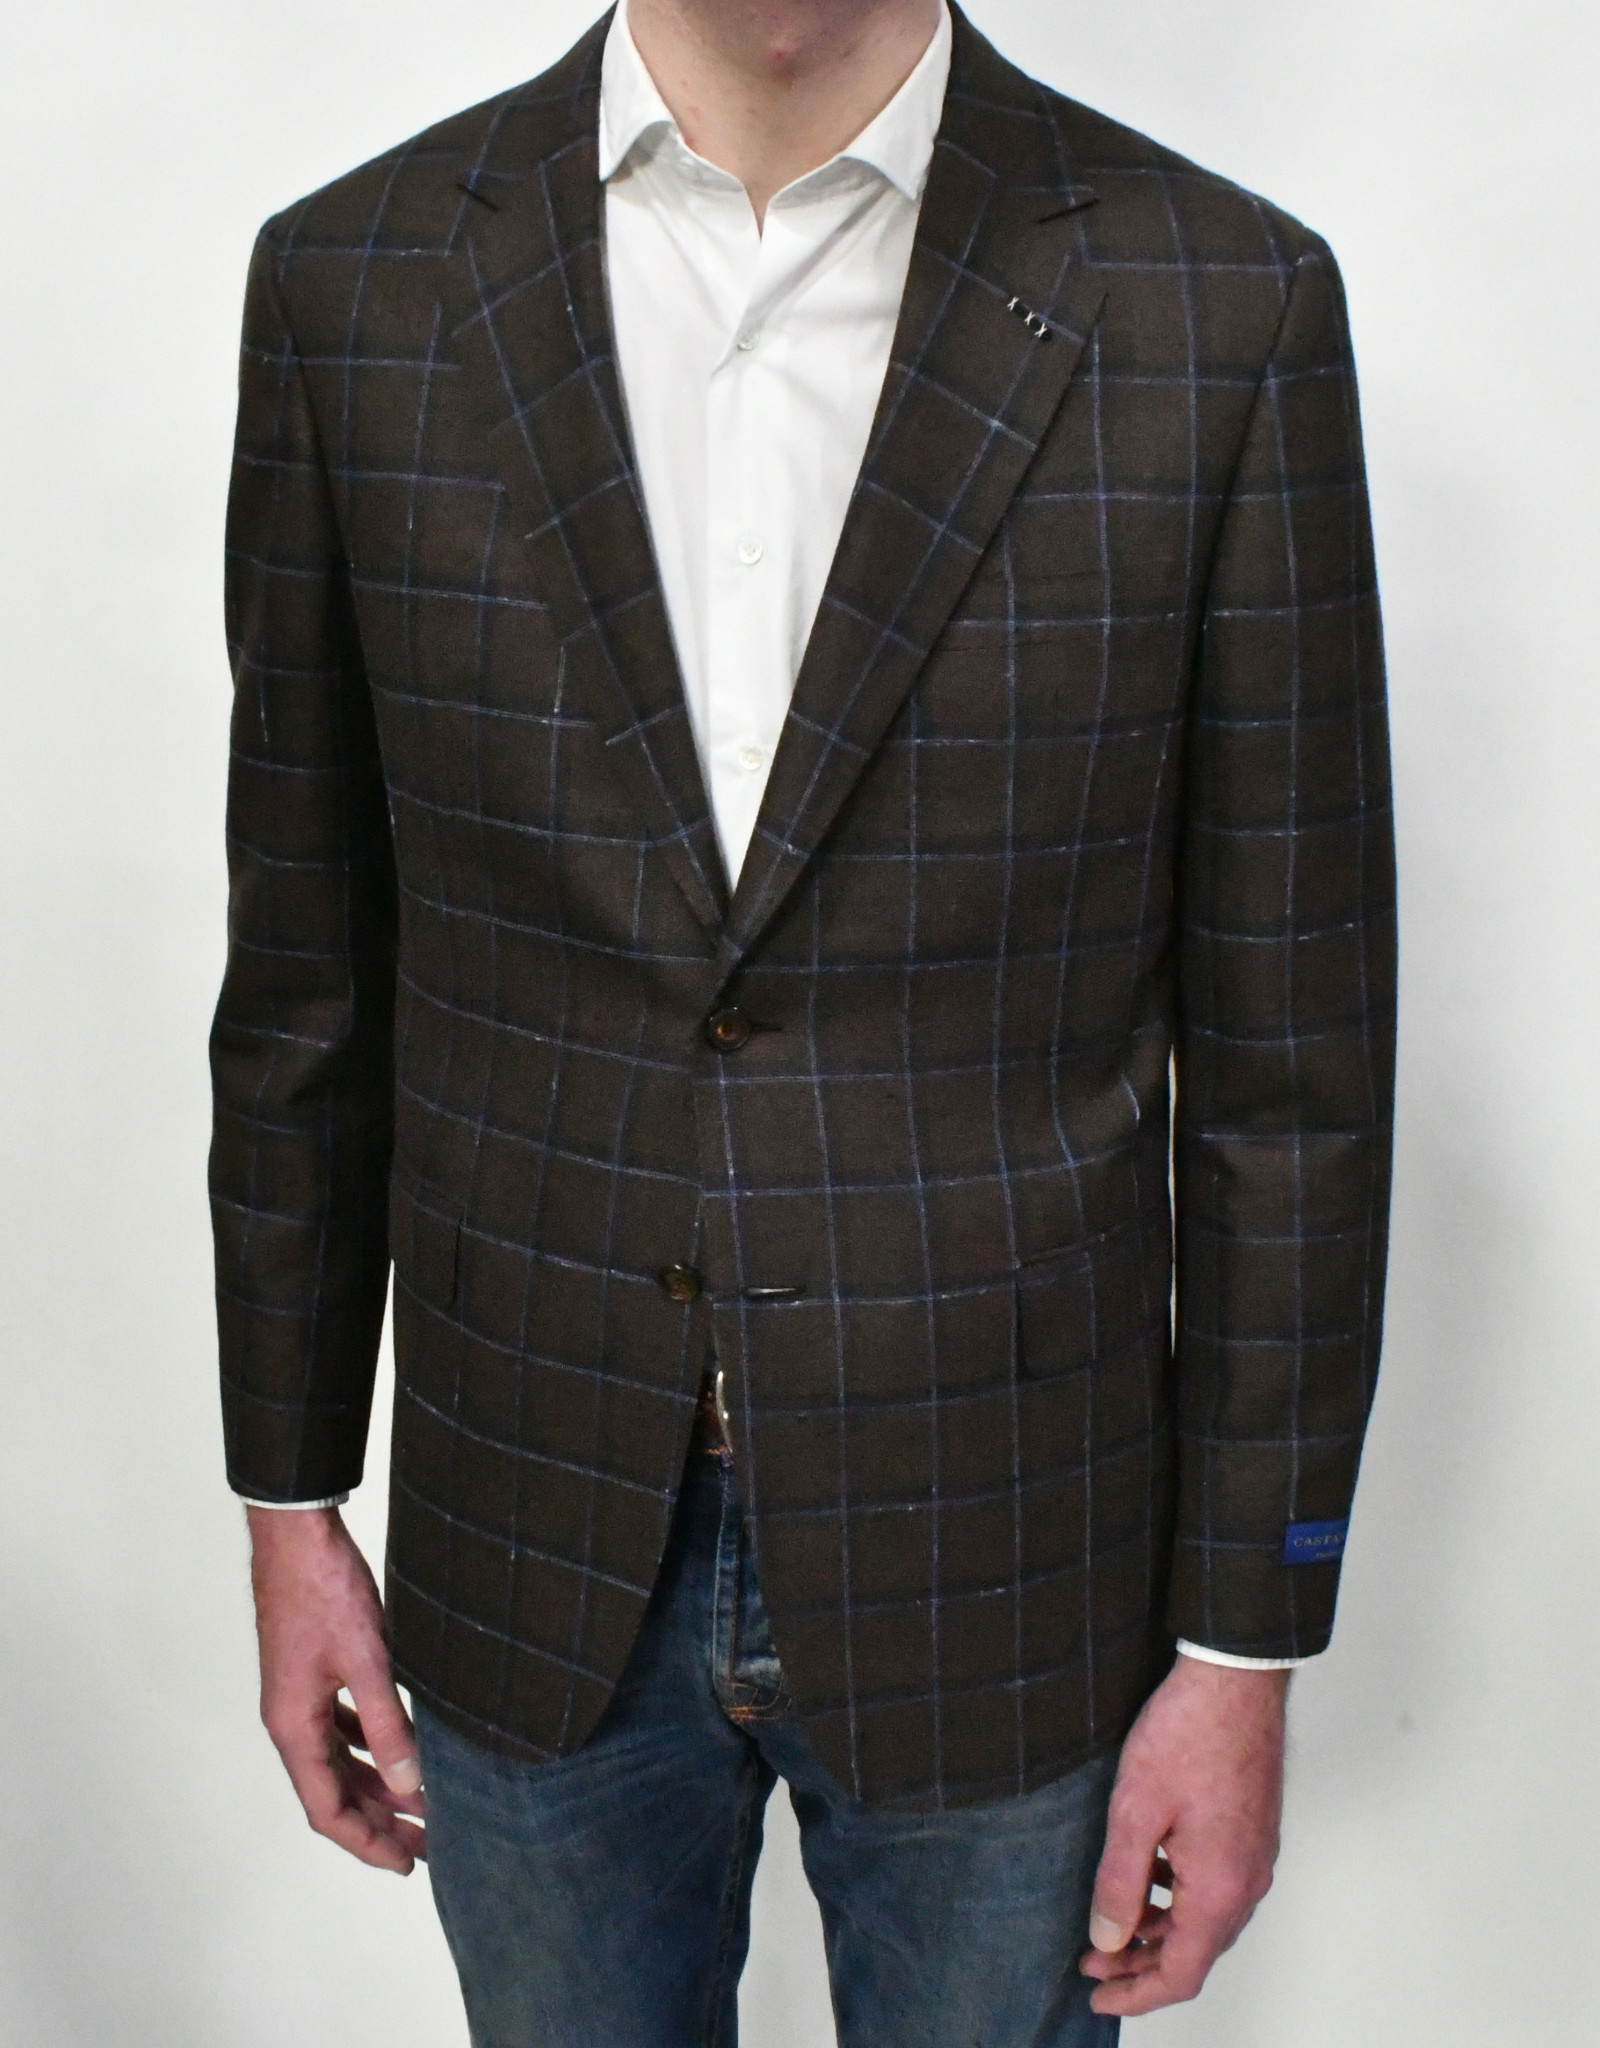 Castangia Brown With Blue Windowpane Sport Coat - Liles Clothing Studio